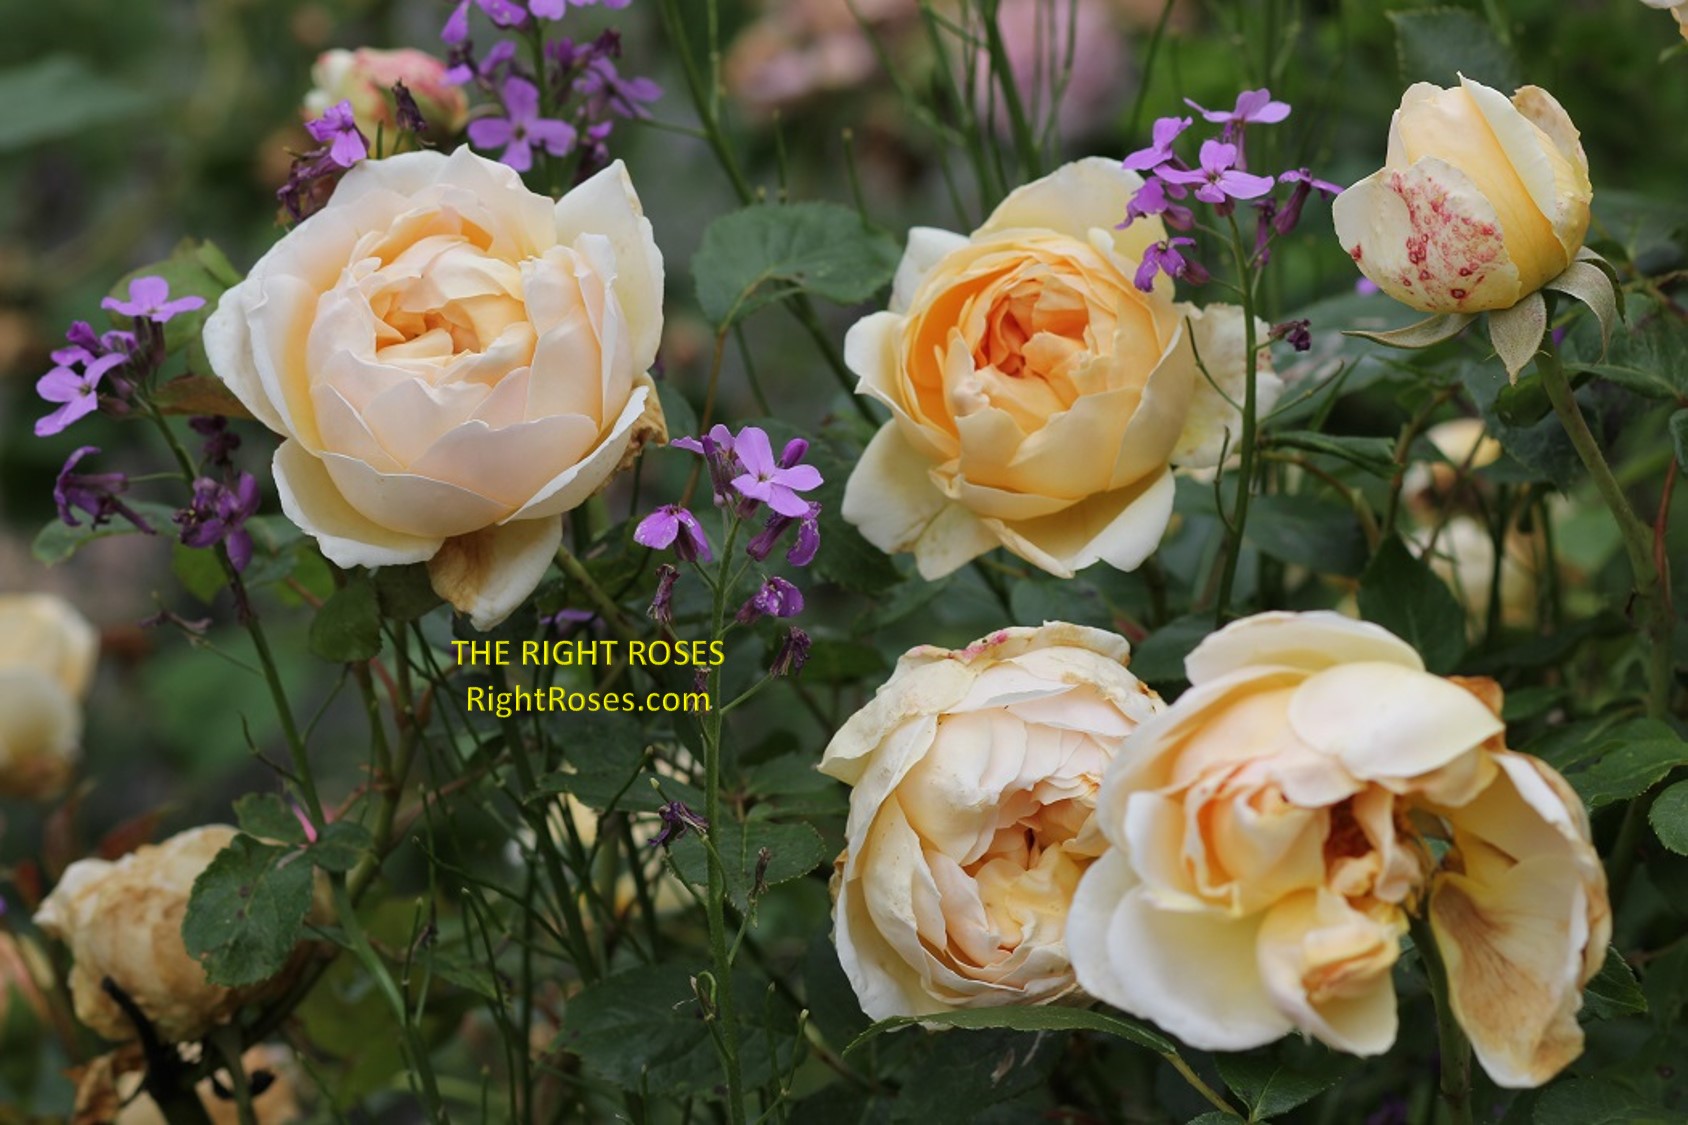 Jude The Obscure rose review the right roses score best top garden store david austin english roses rose products rose rating the right leap rose food fertilizer